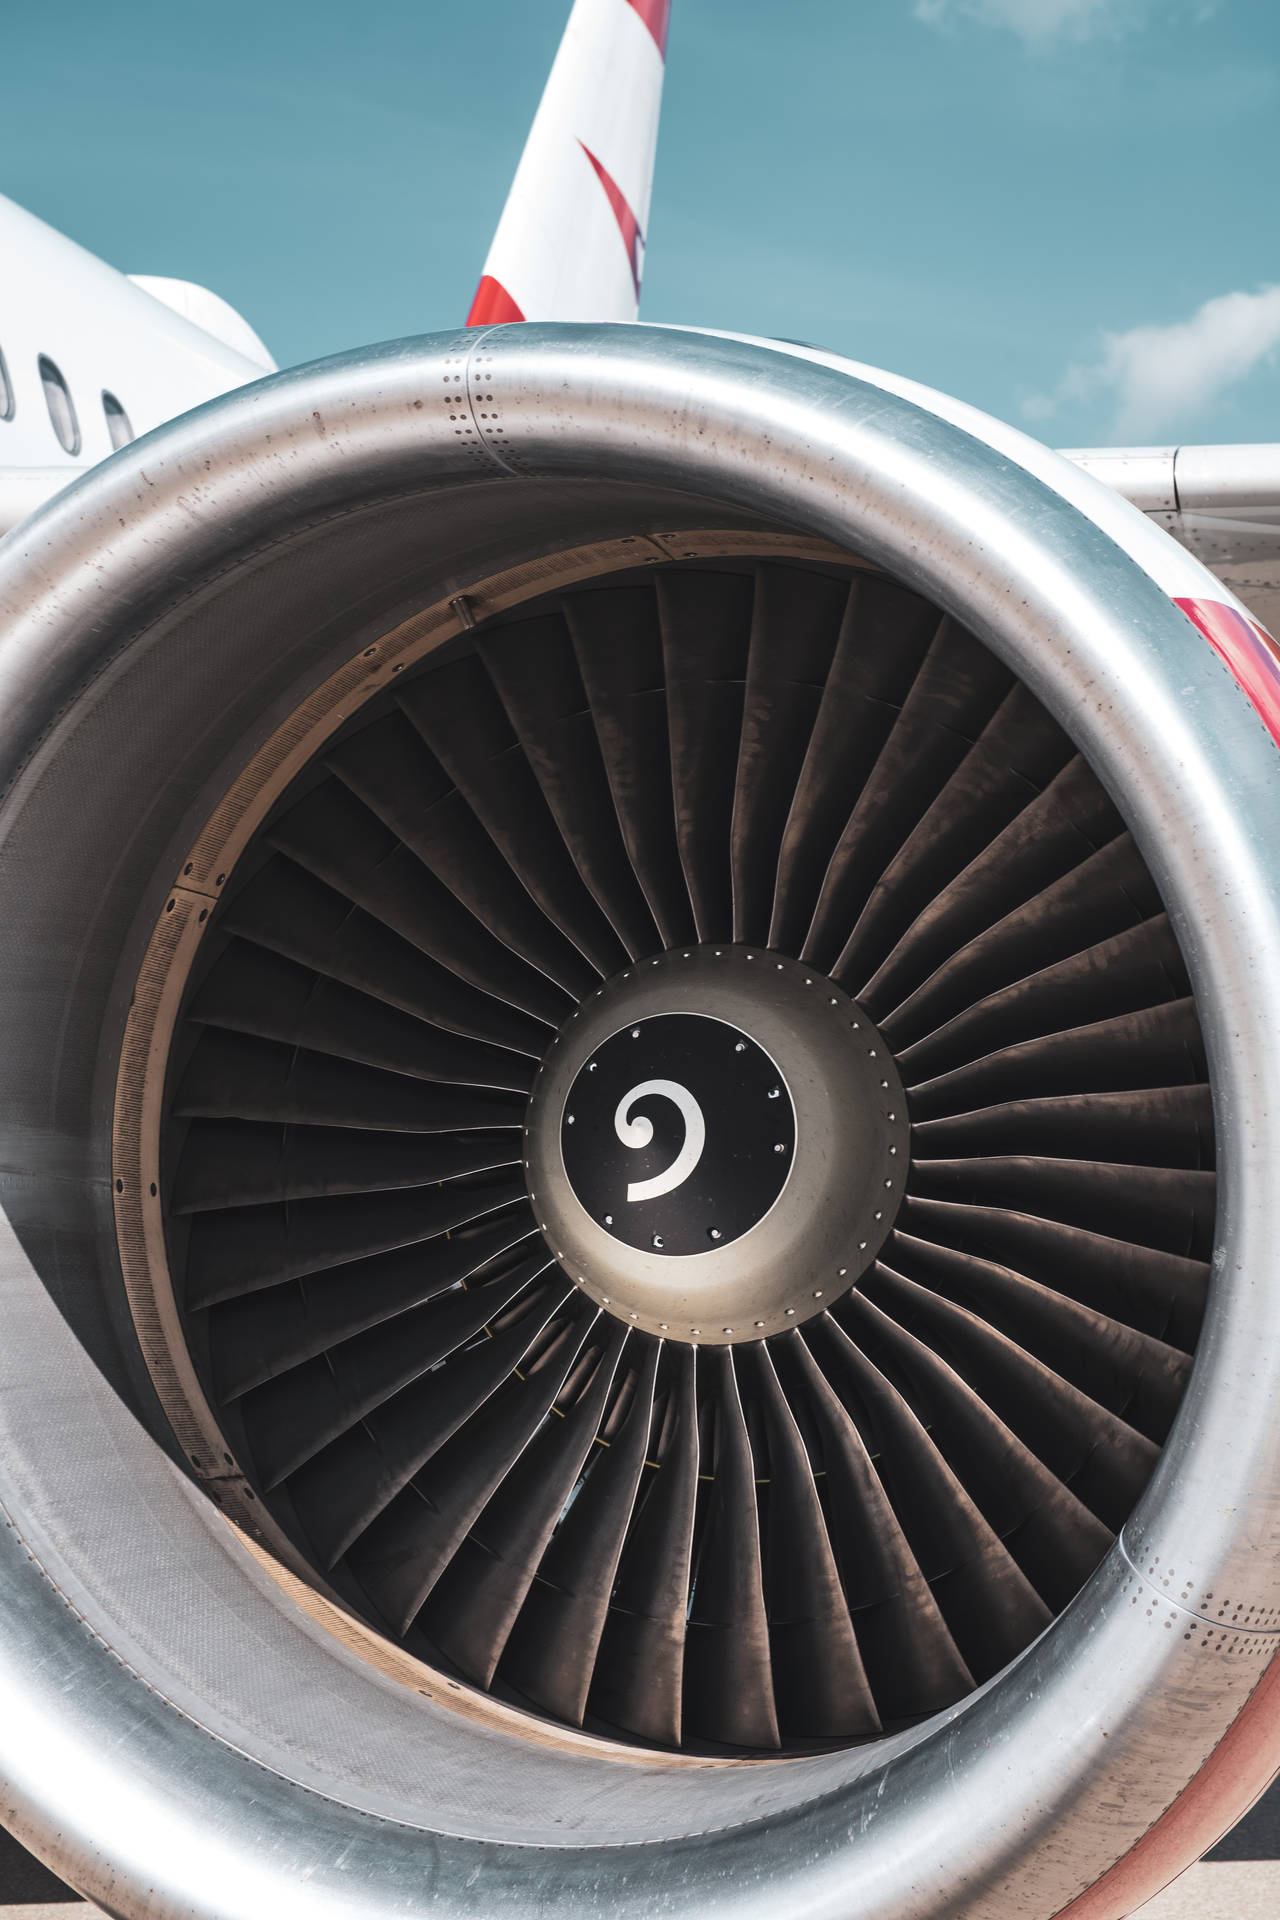 Actual Close-up View of a Jet Engine Wallpaper